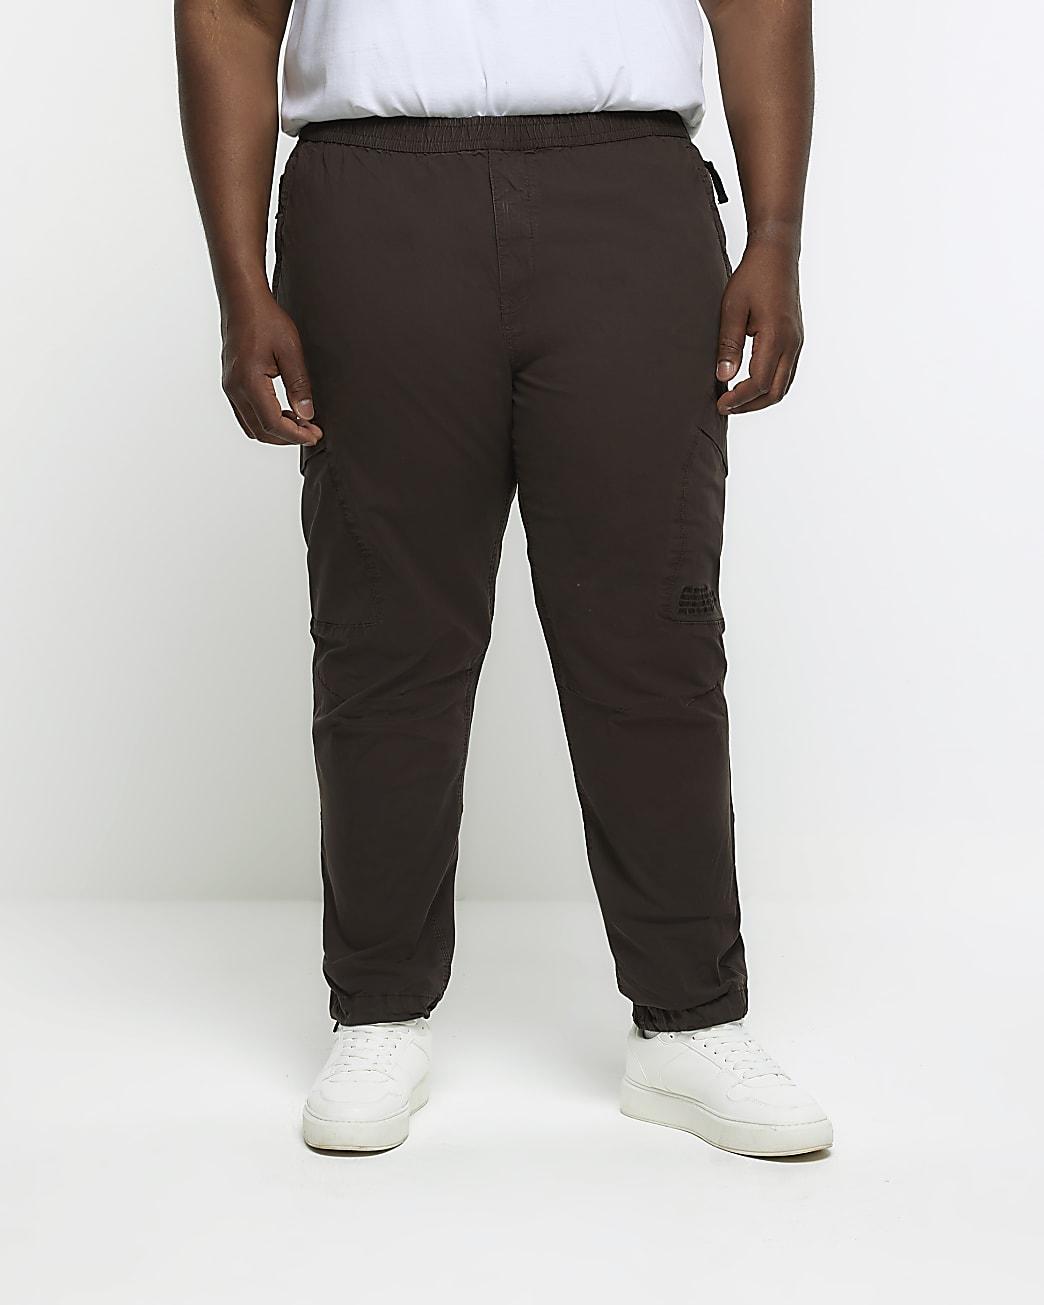 River Island Big  Tall smart trousers in grey check  ASOS